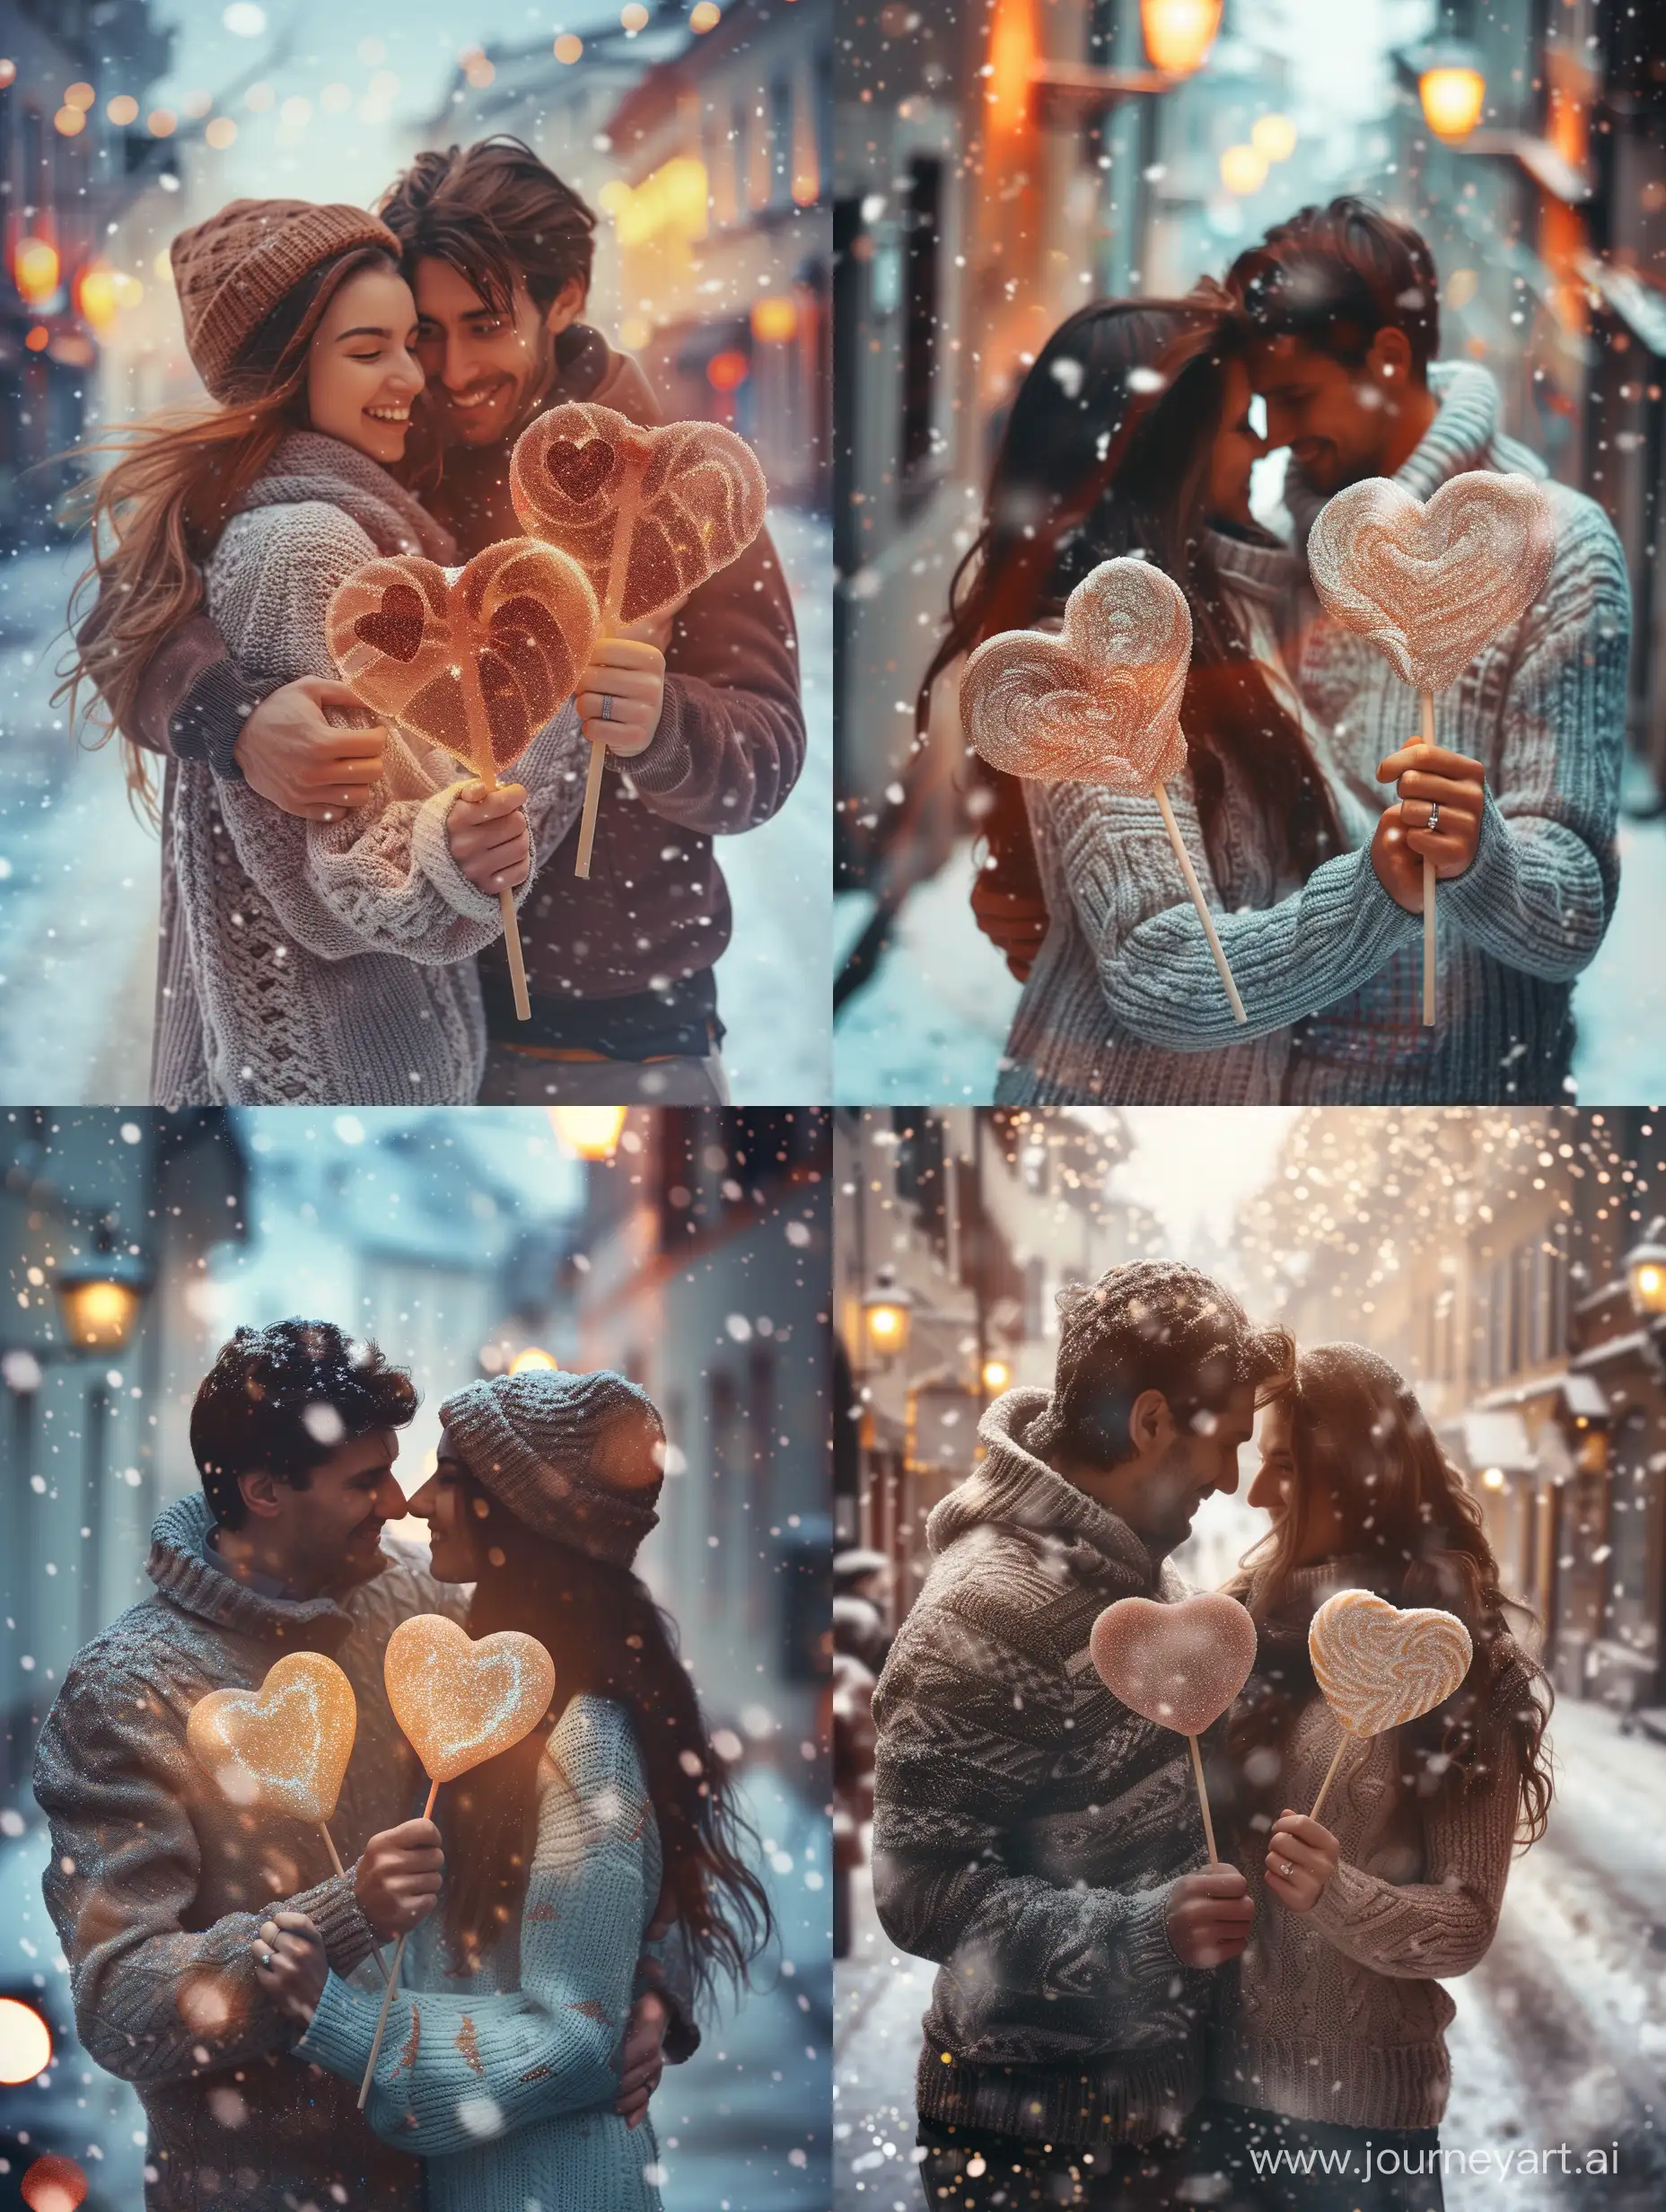 Romantic-Couple-Embracing-with-HeartShaped-Lollipops-in-Snowy-Street